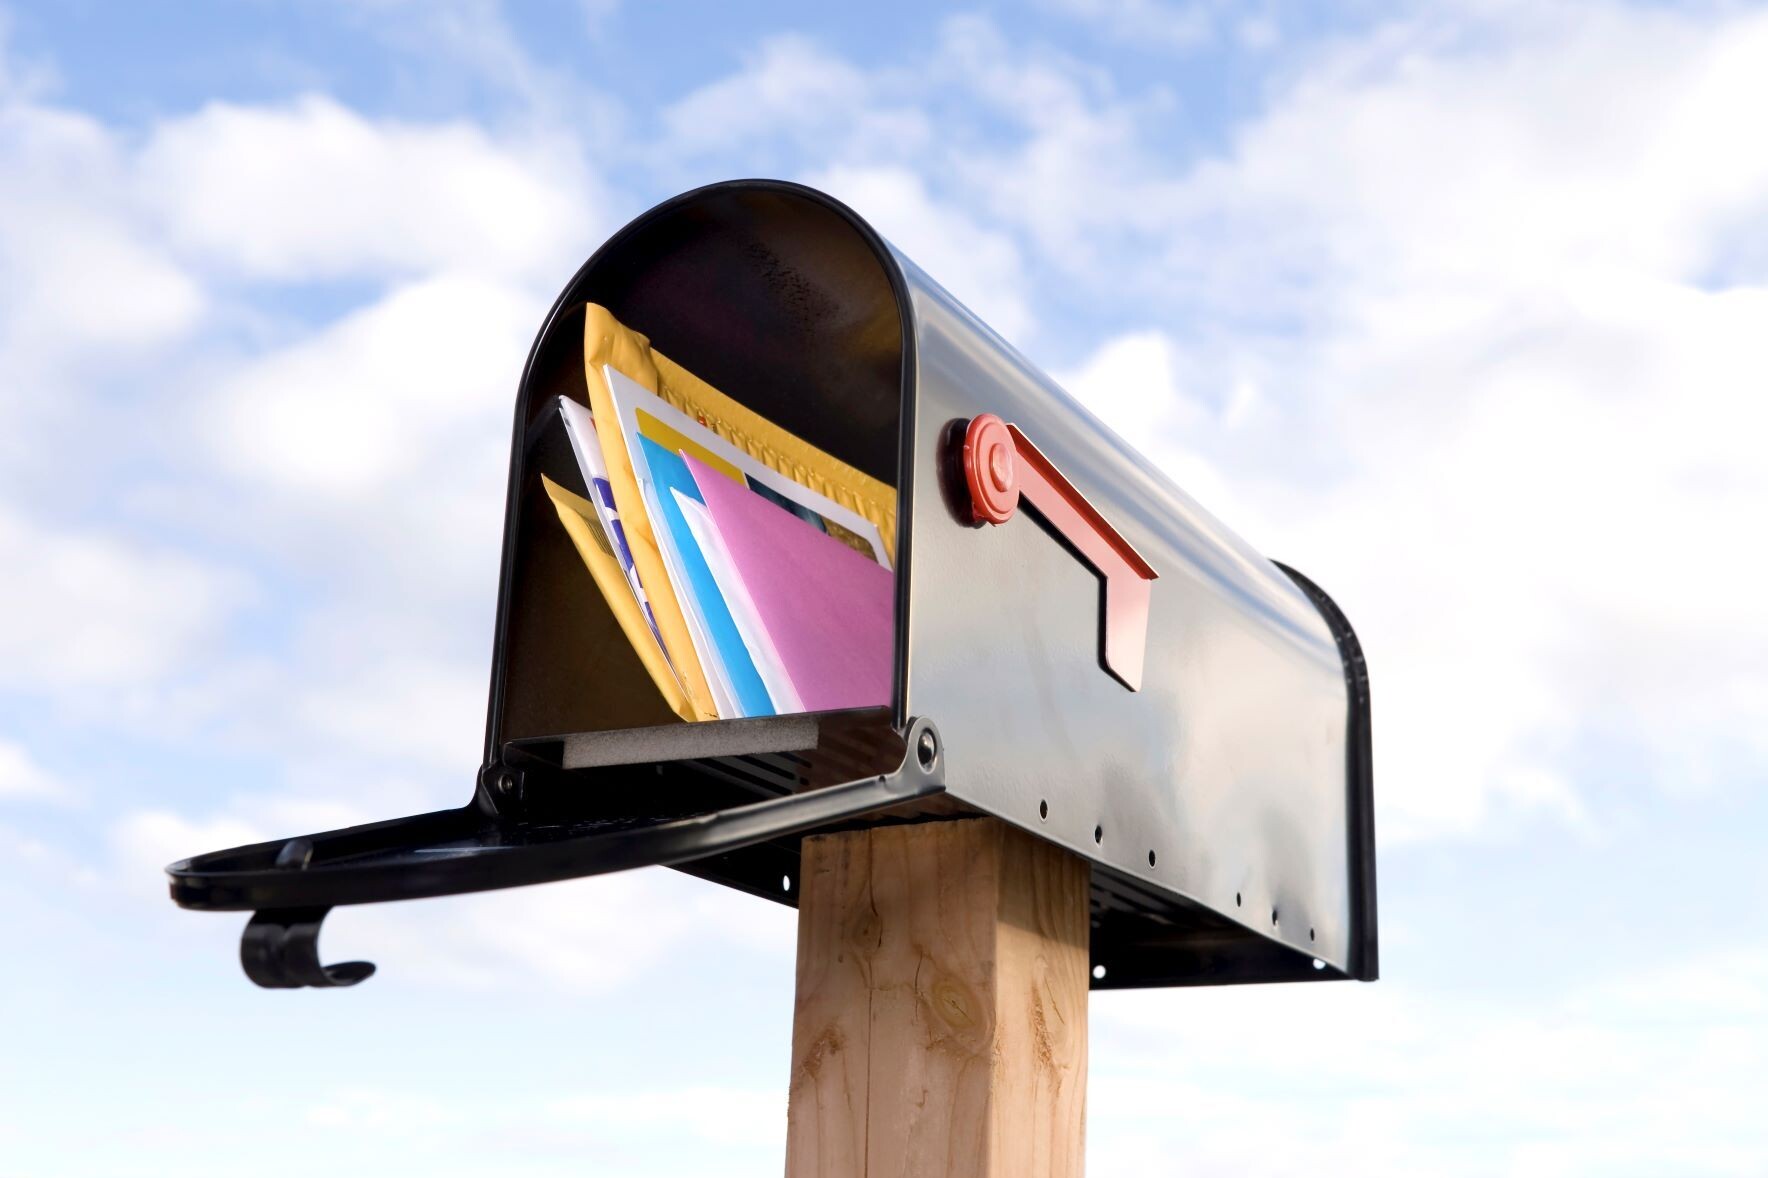 Debunking Direct Mail Myths